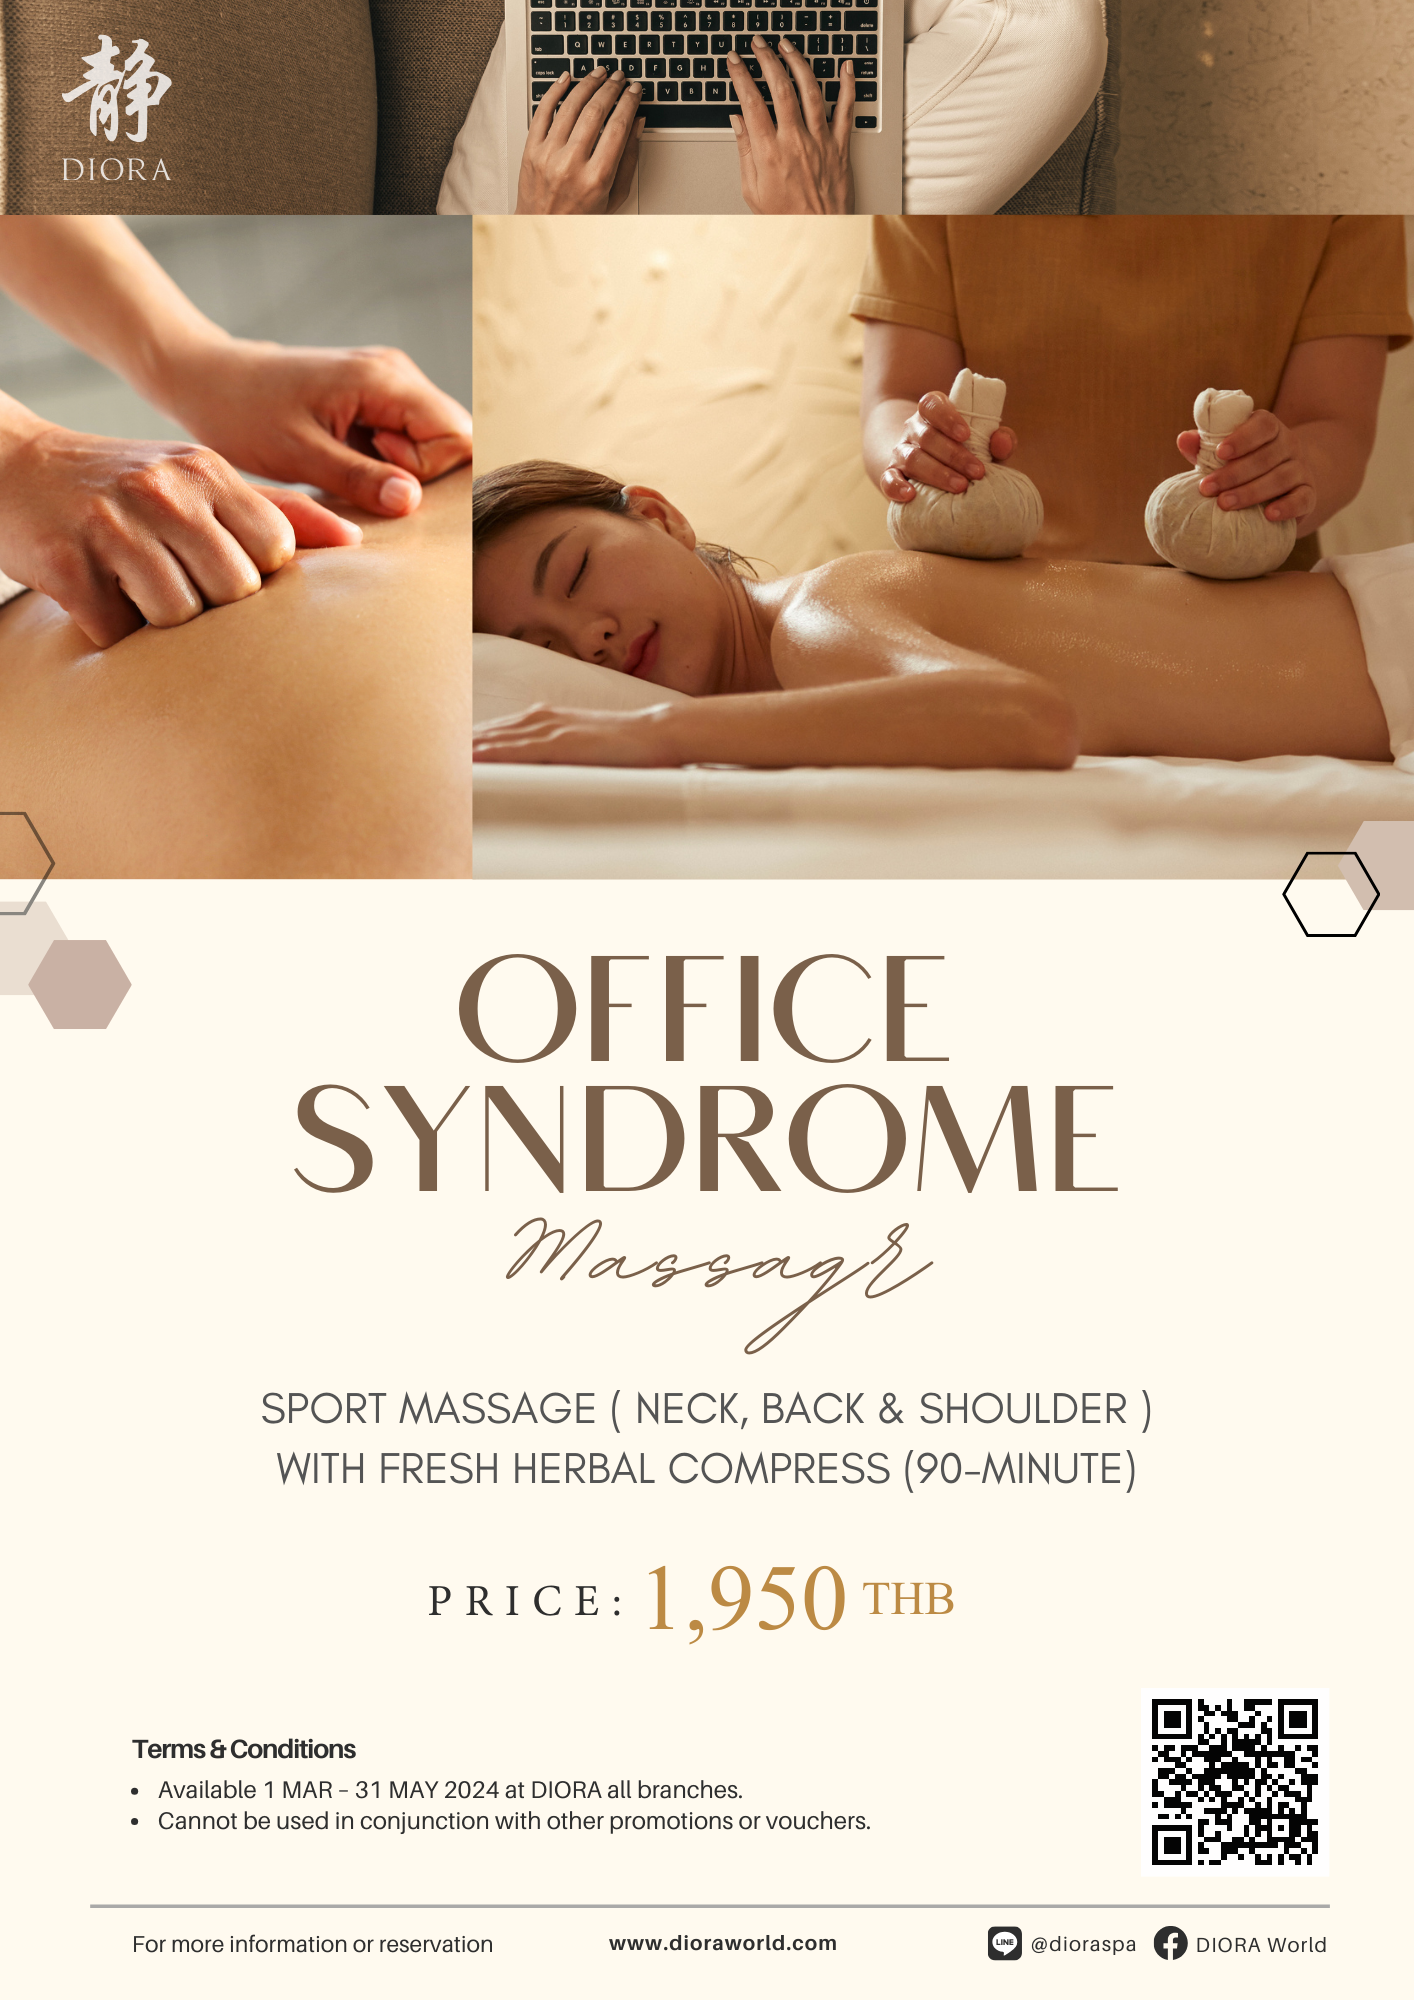 OFFICE SYNDROME MASSAGE